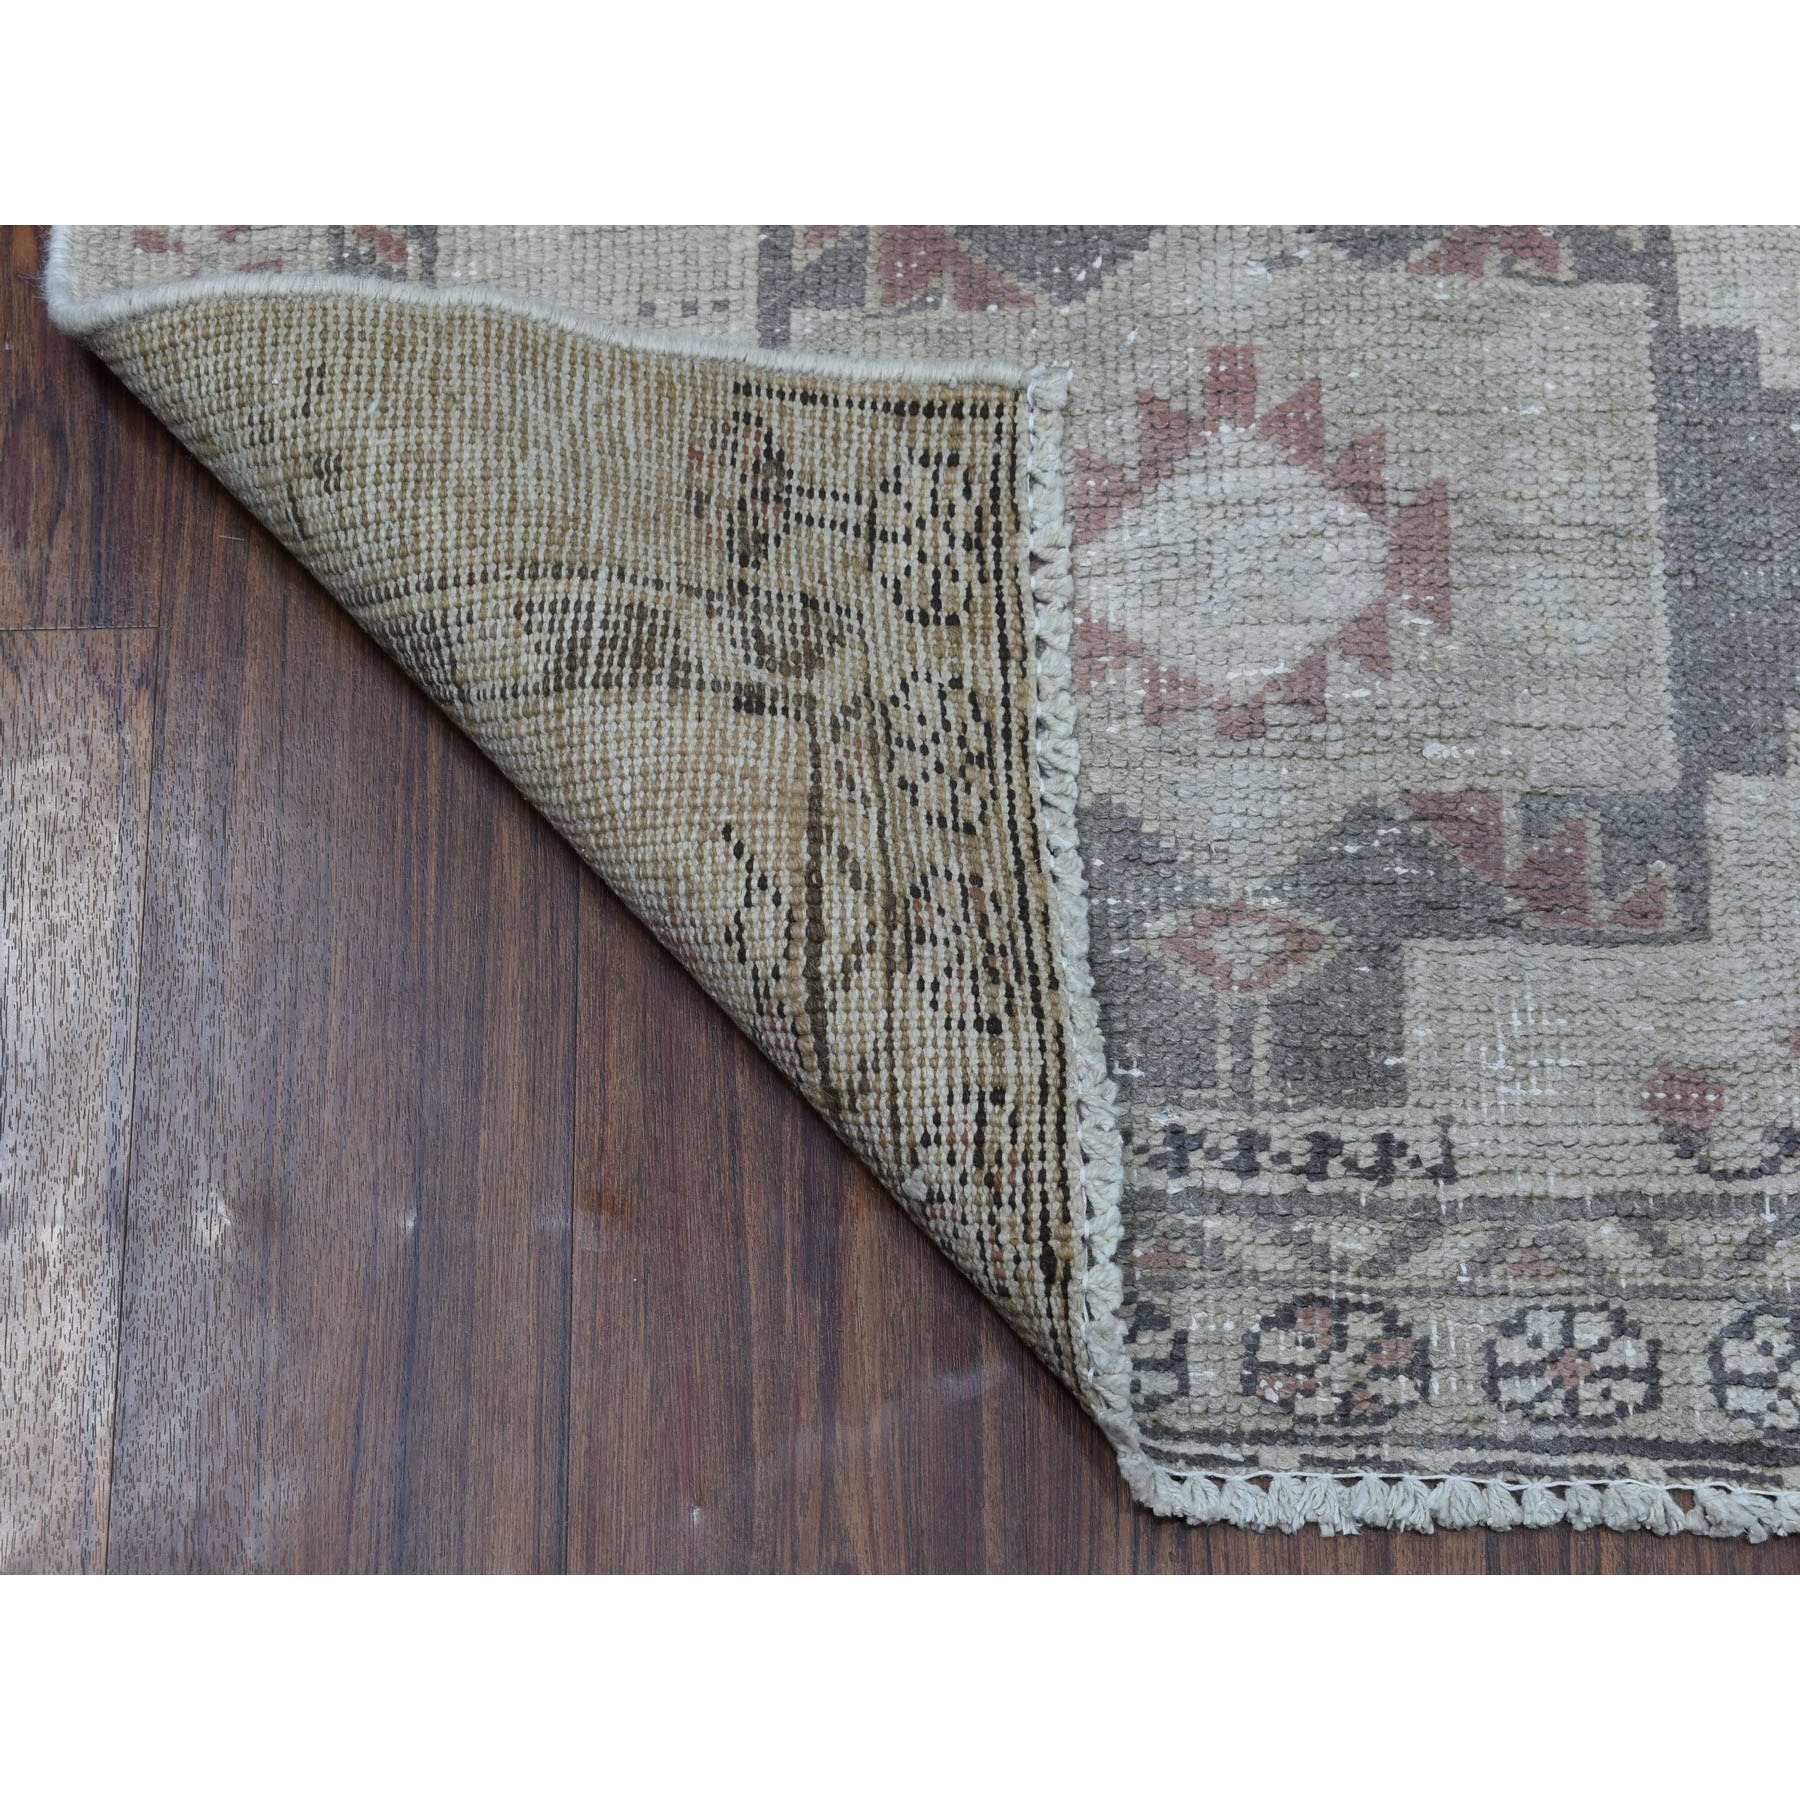 2-9 x9-3  Vintage And Worn Down Distressed Colors Persian Qashqai Runner Hand Knotted Bohemian Rug 